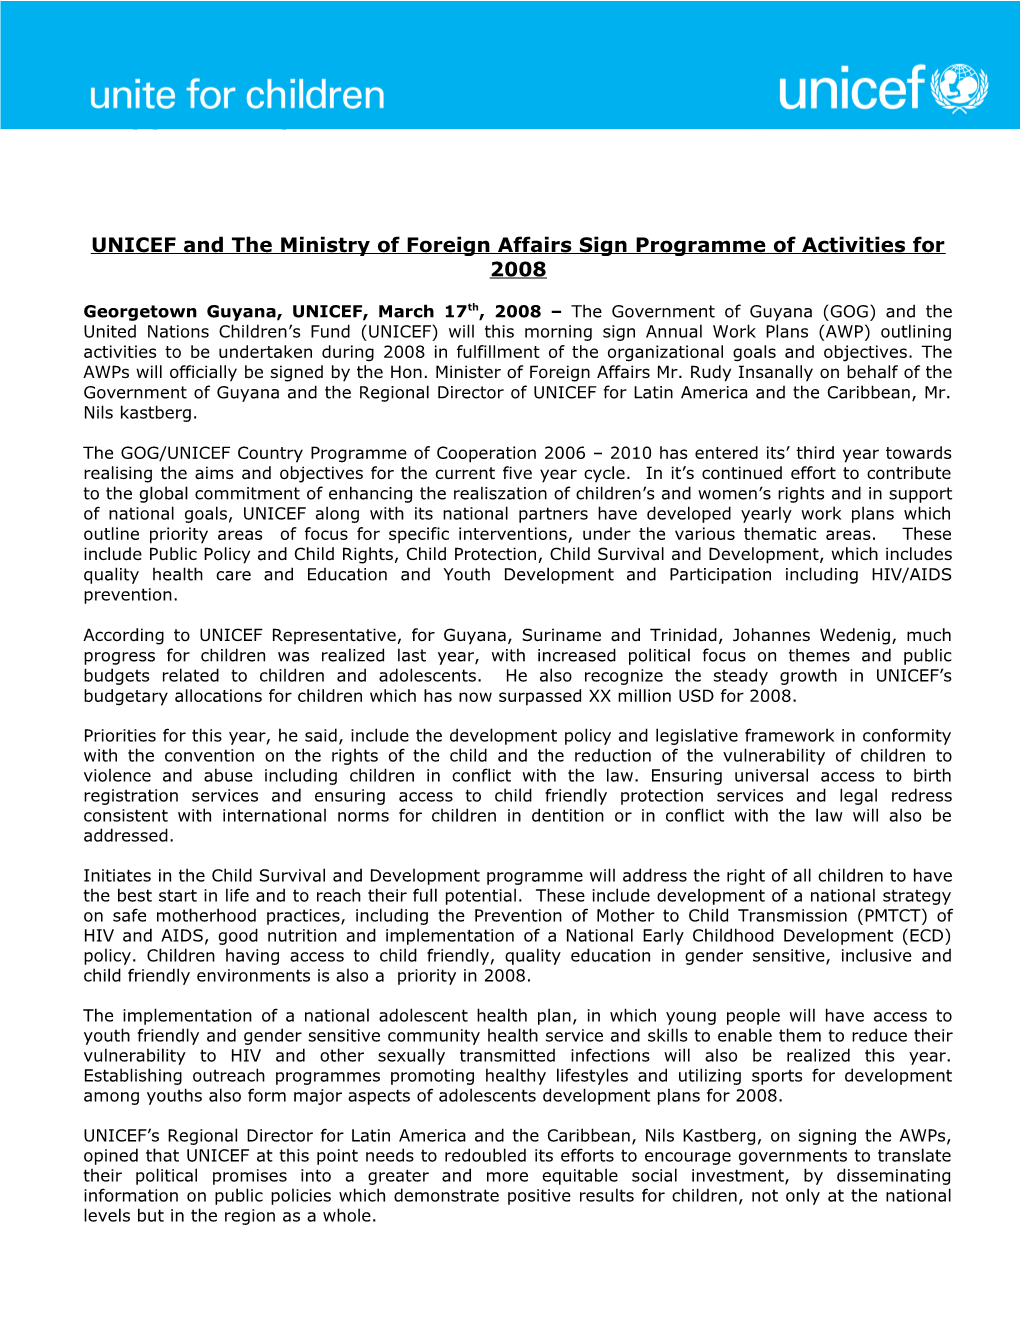 UNICEF and the Ministry of Foreign Affairs Sign Programme of Activities for 2008